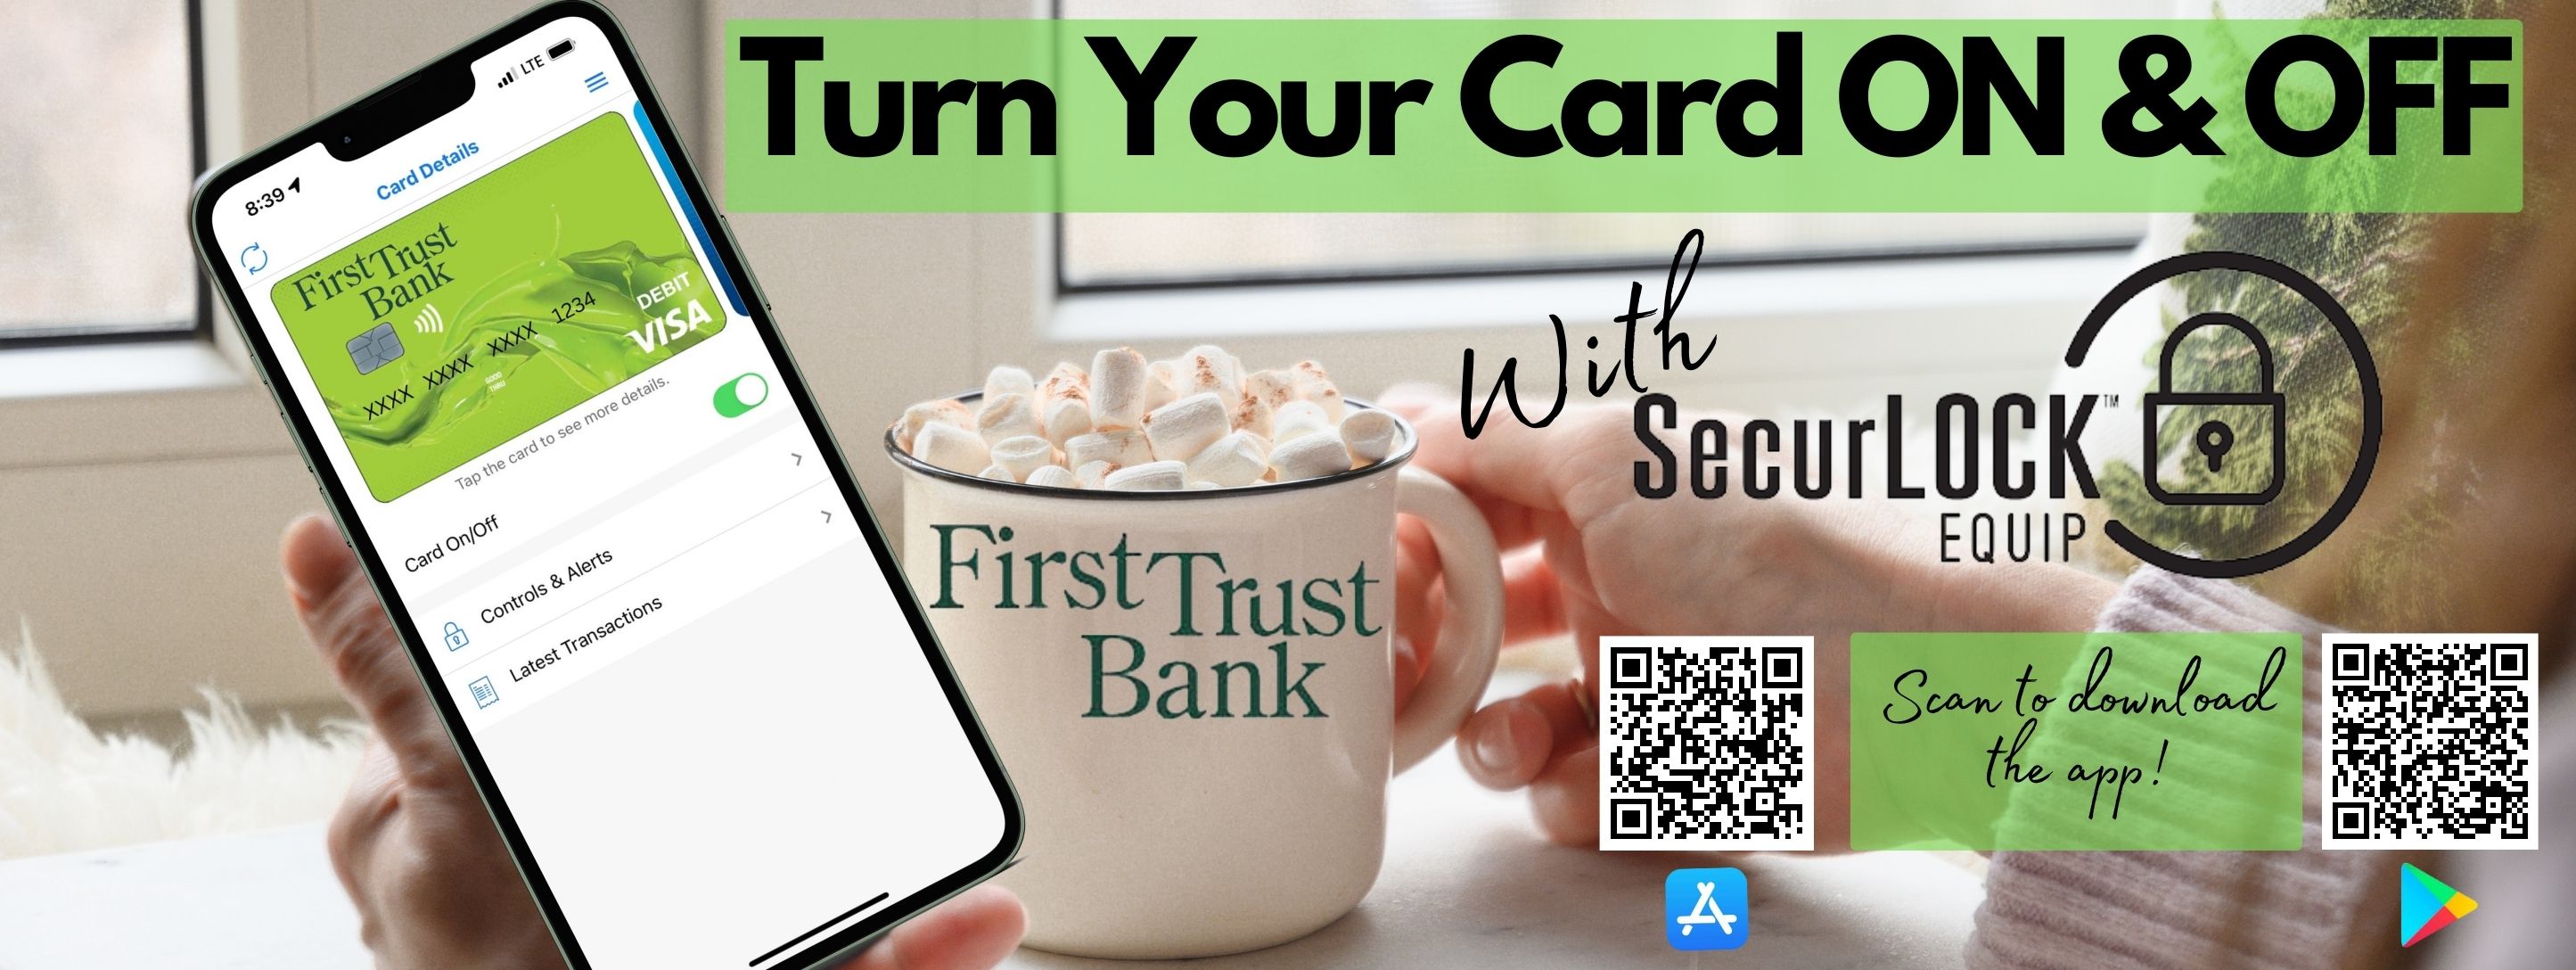 Turn your card on & off with SecurLock Equip Scan to Download teh app!